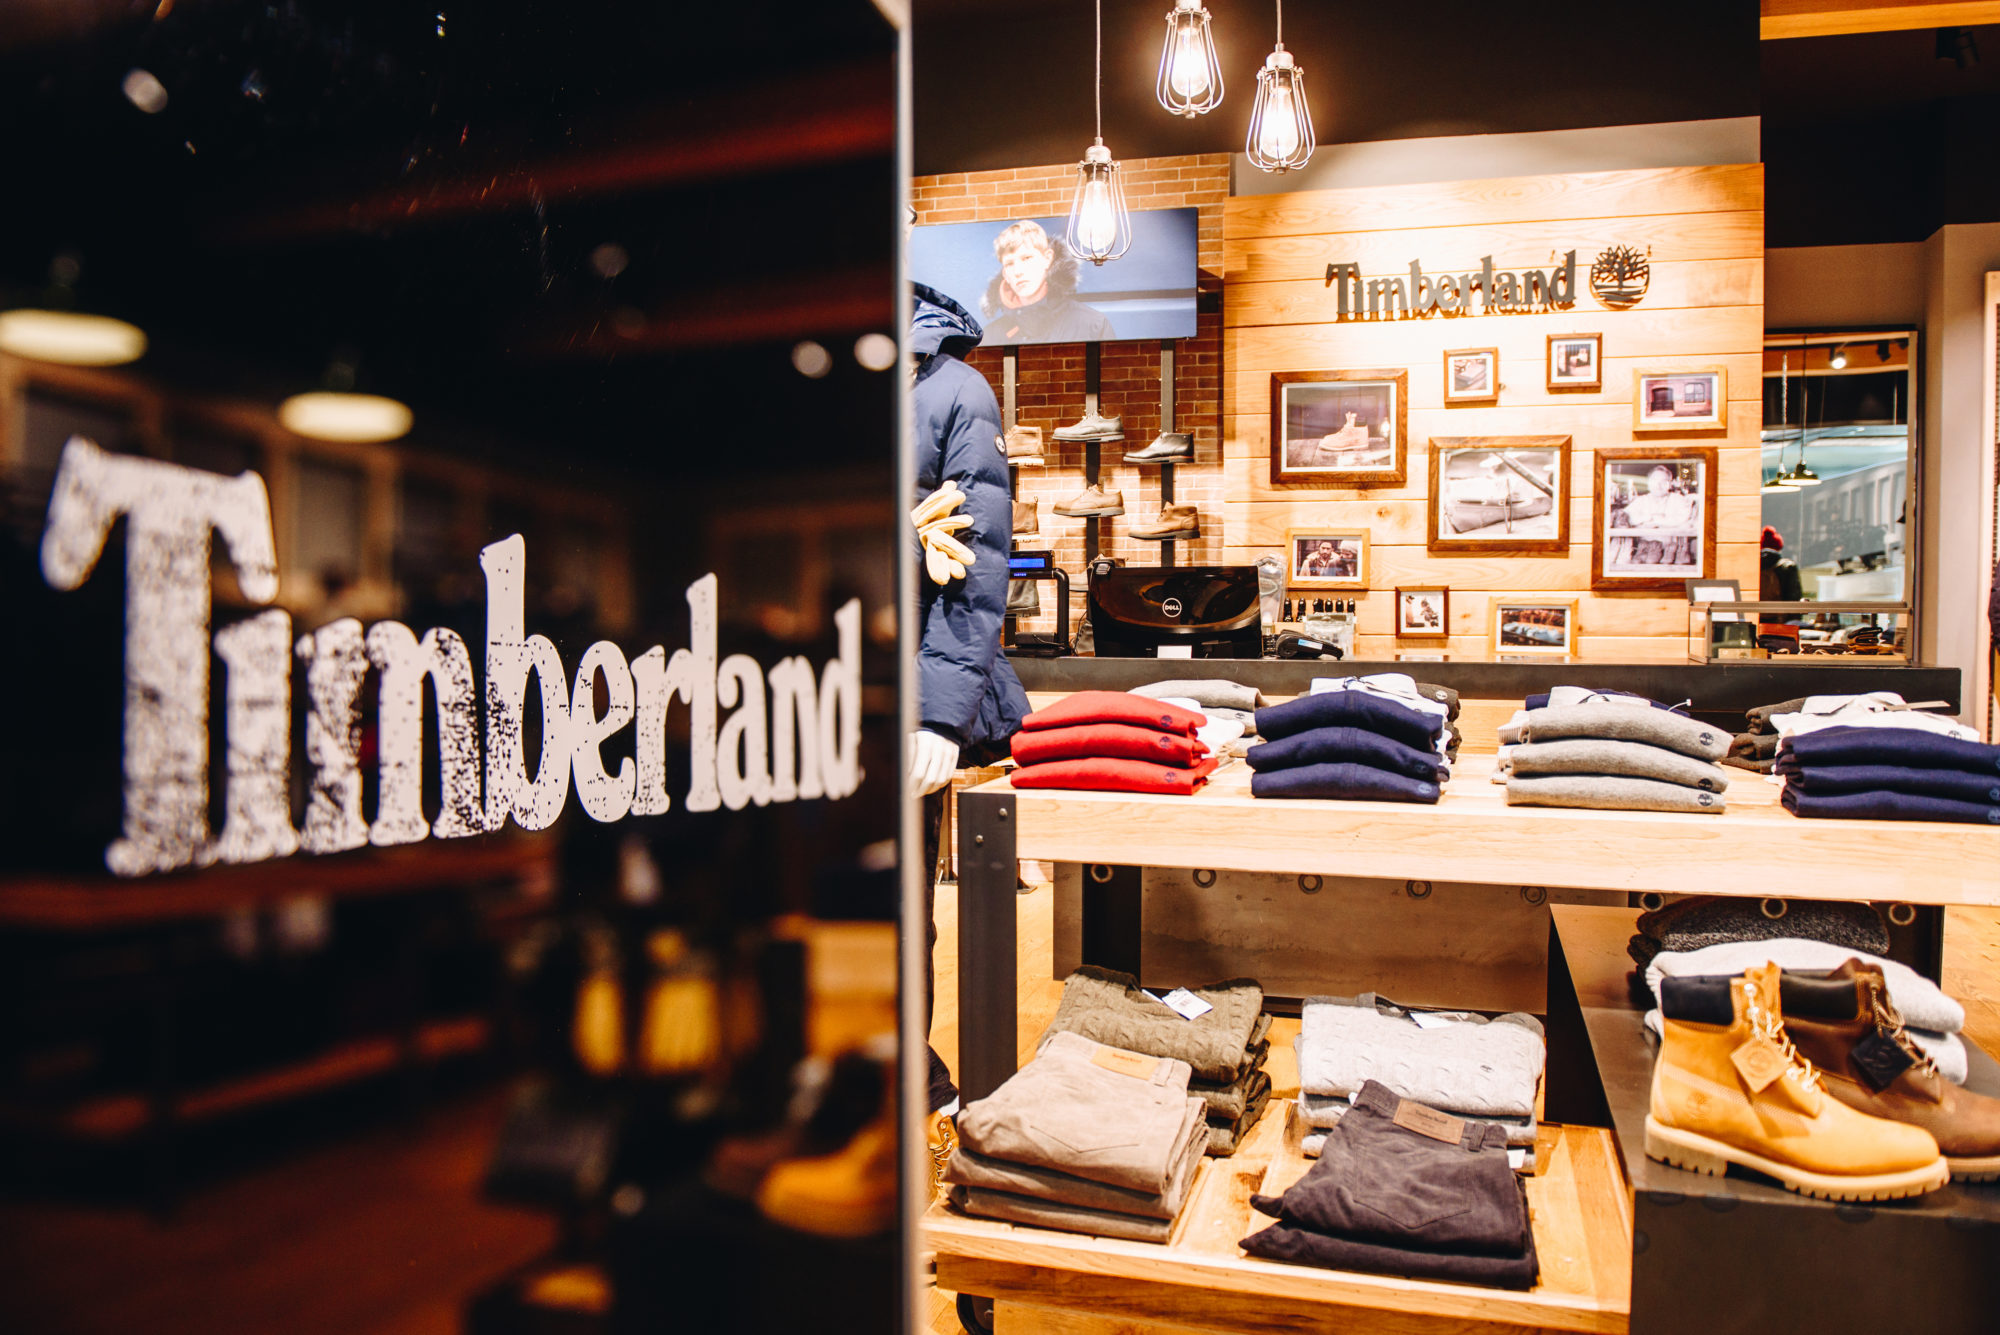 Timberland Castel Romano Designer Outlet - Martino Group